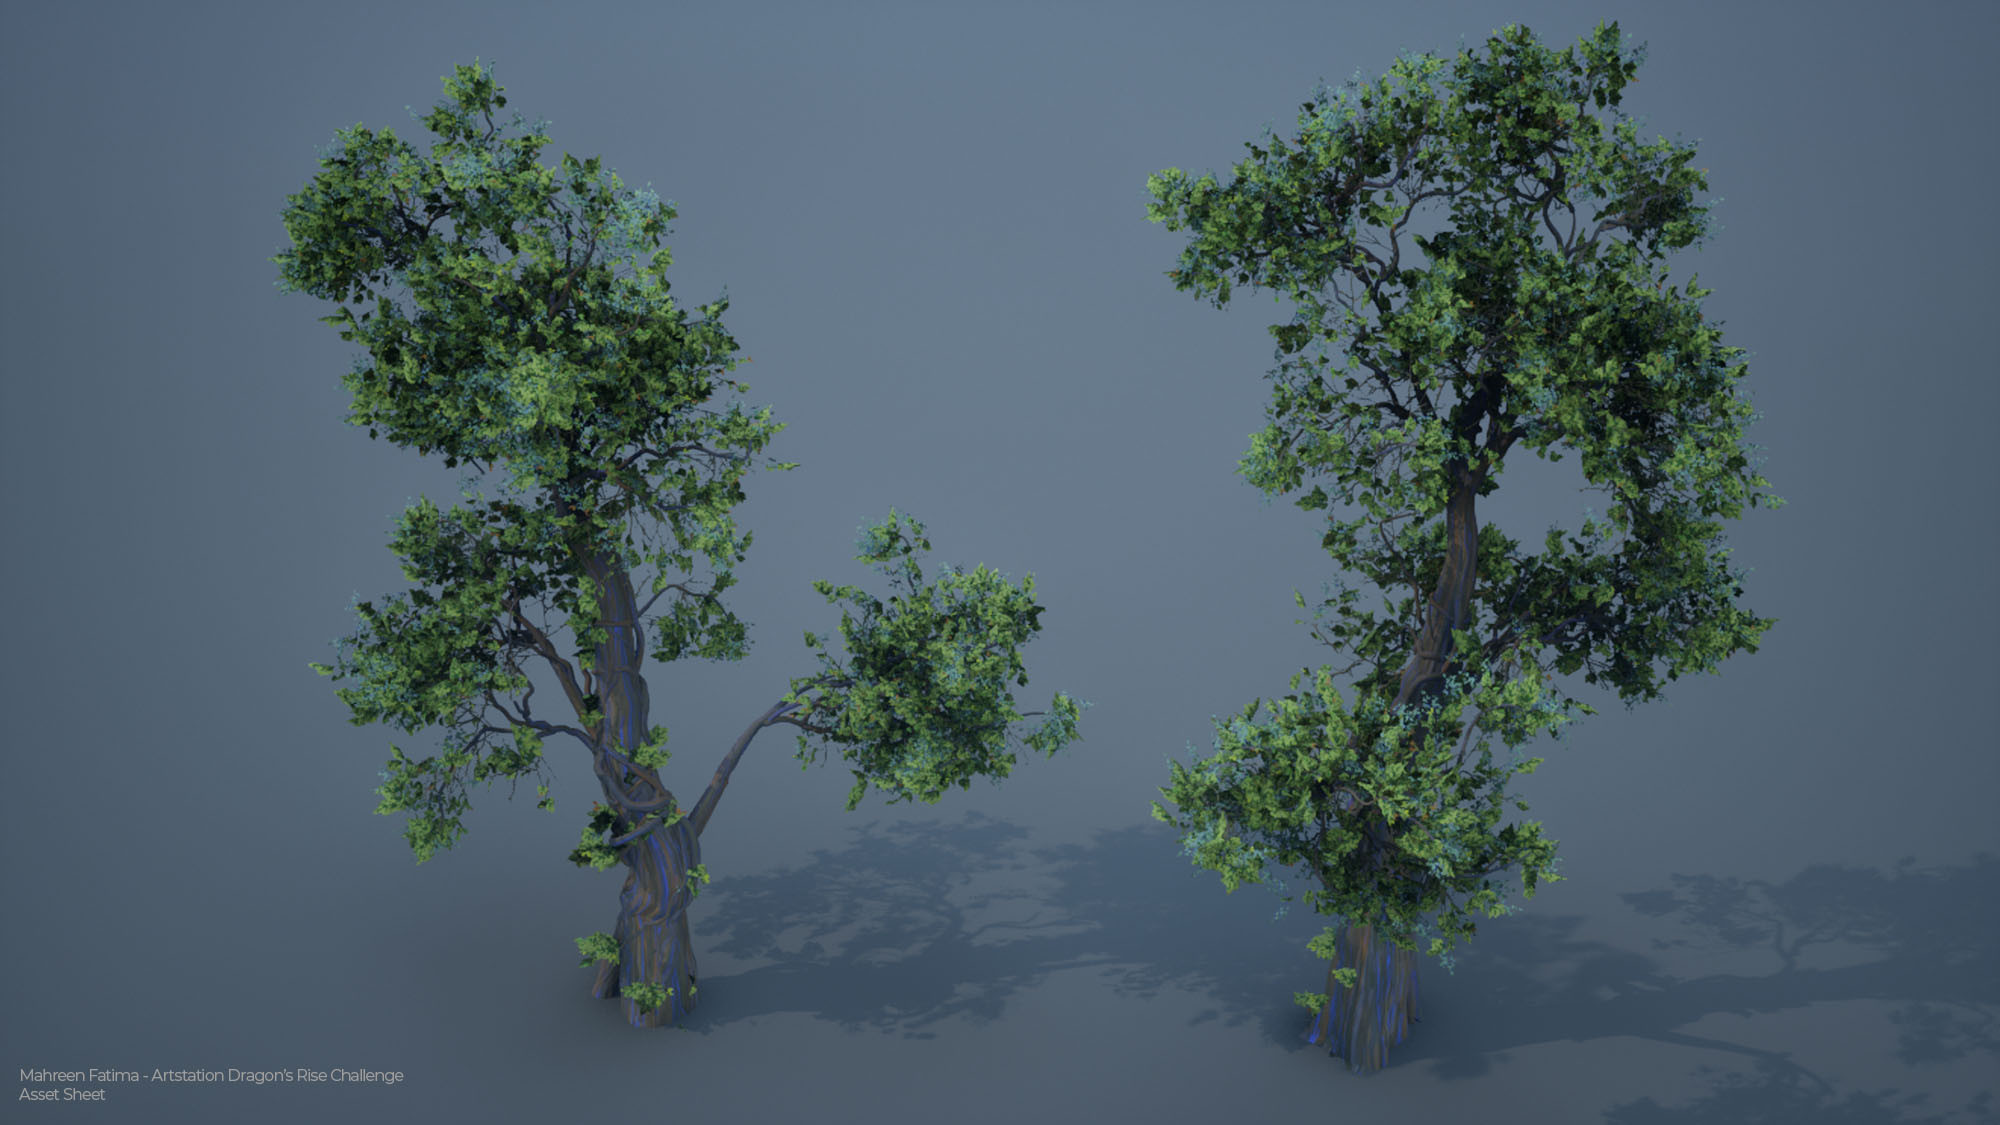 This is the secondary trunk used throughout the environment where trunk + foliage was needed.